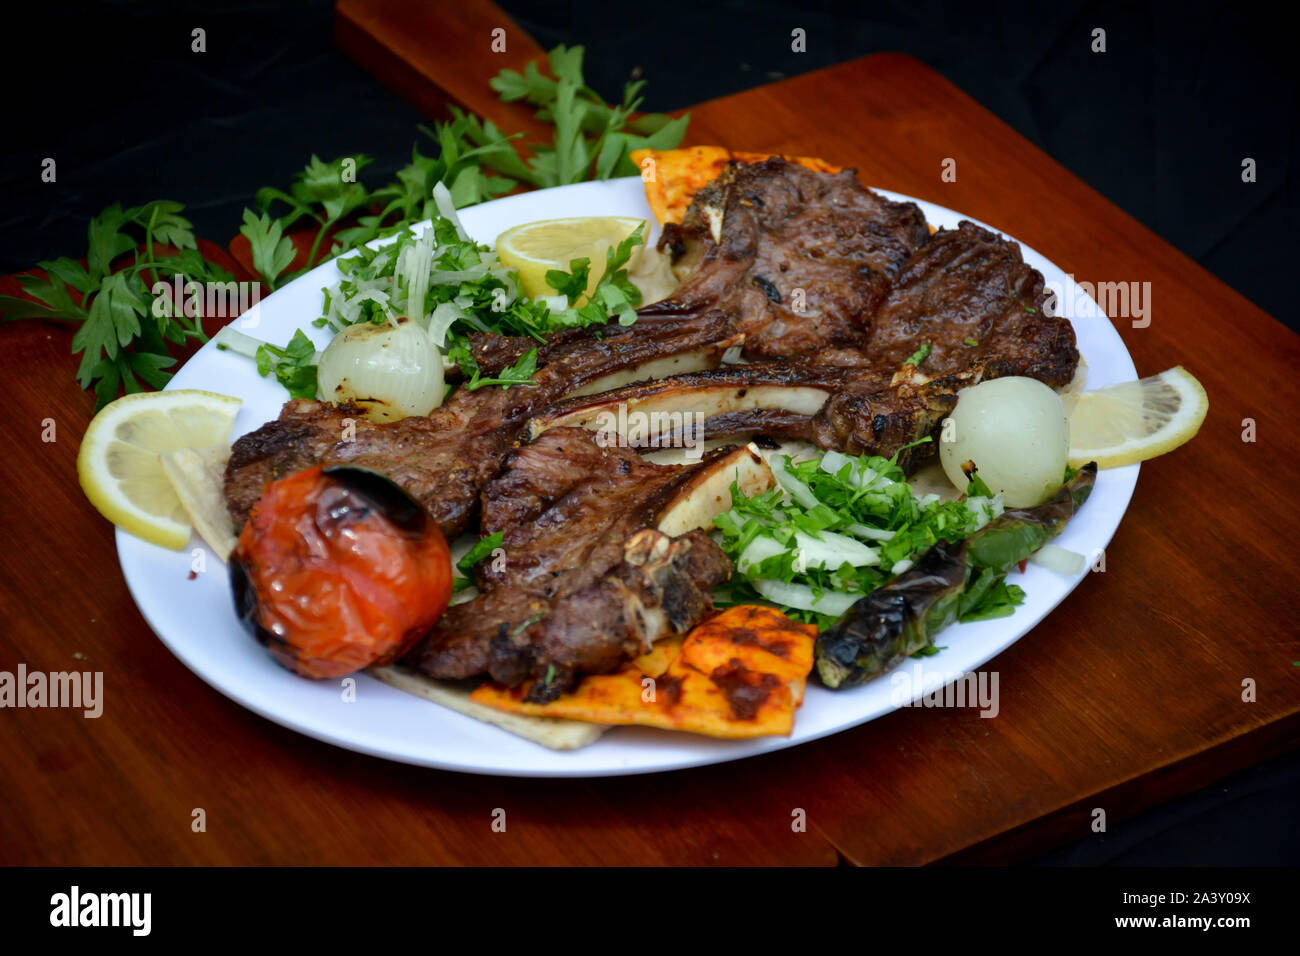 Plate of traditional eastern RIYASH Arabic traditional food . Middle Eastern food. Stock Photo